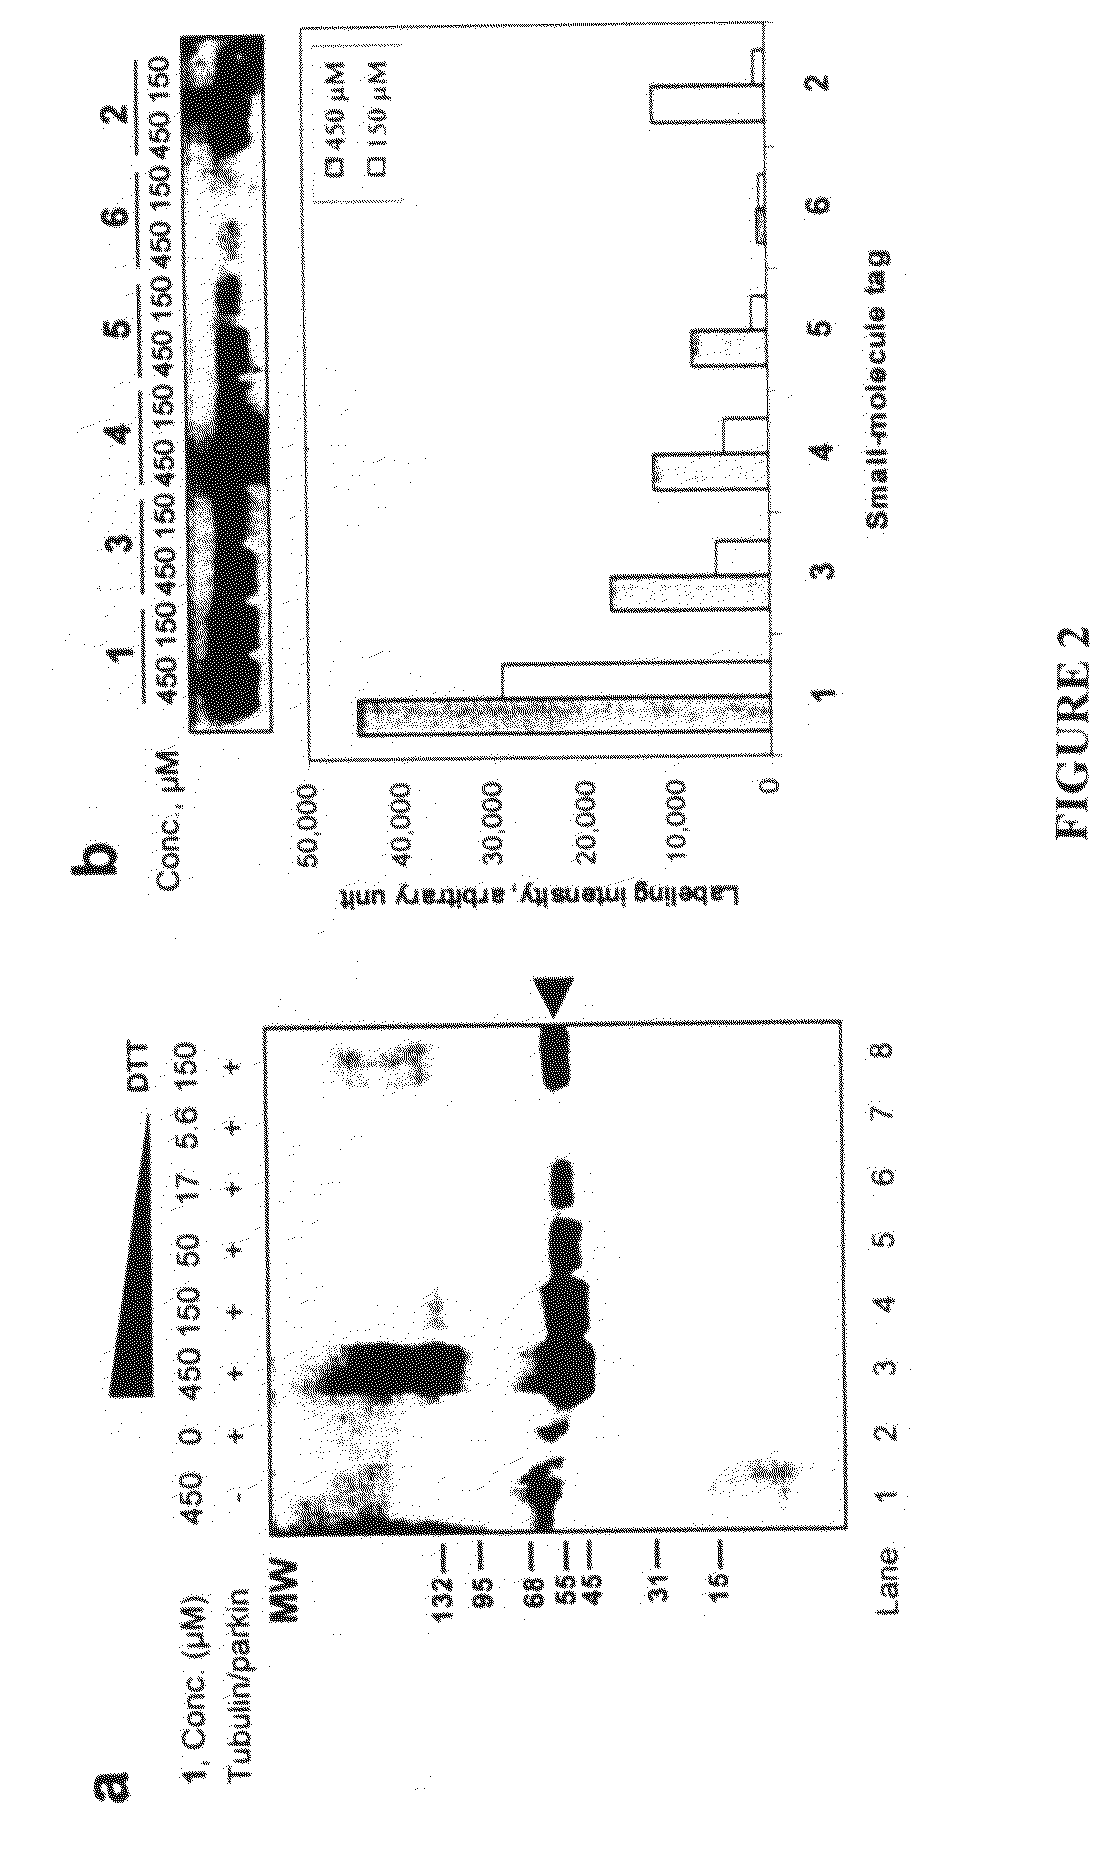 Biochemical method for specific protein labeling